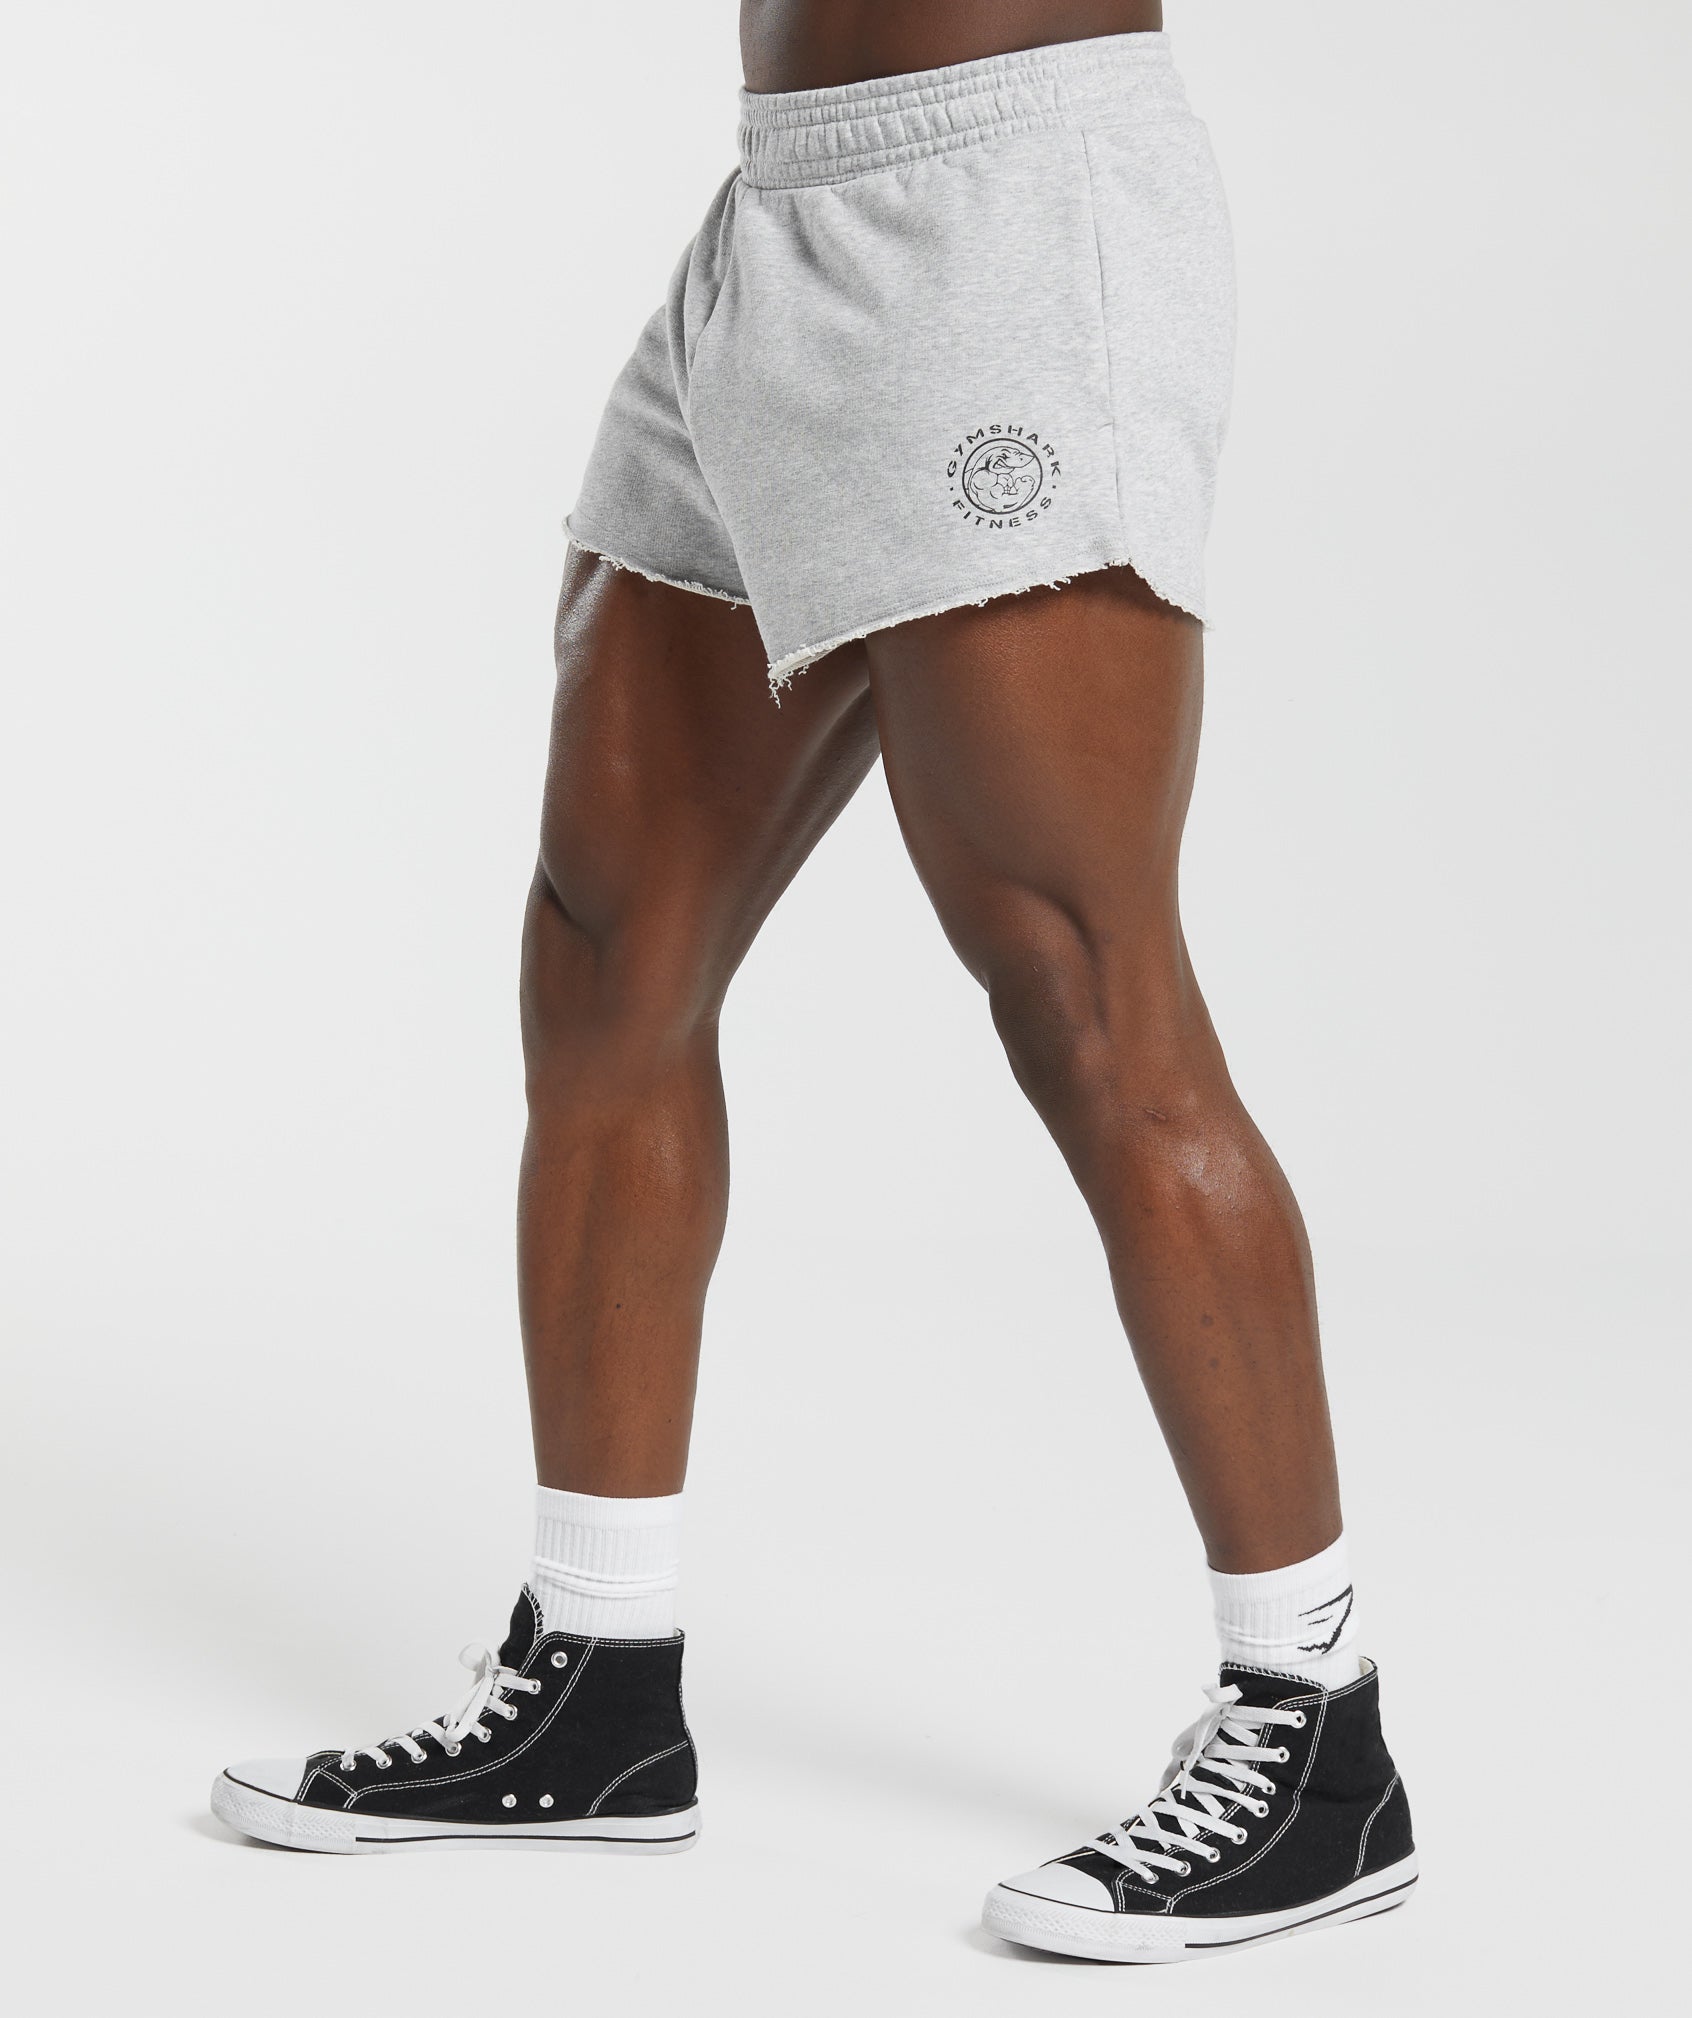 Legacy 4" Shorts in Light Grey Marl - view 3